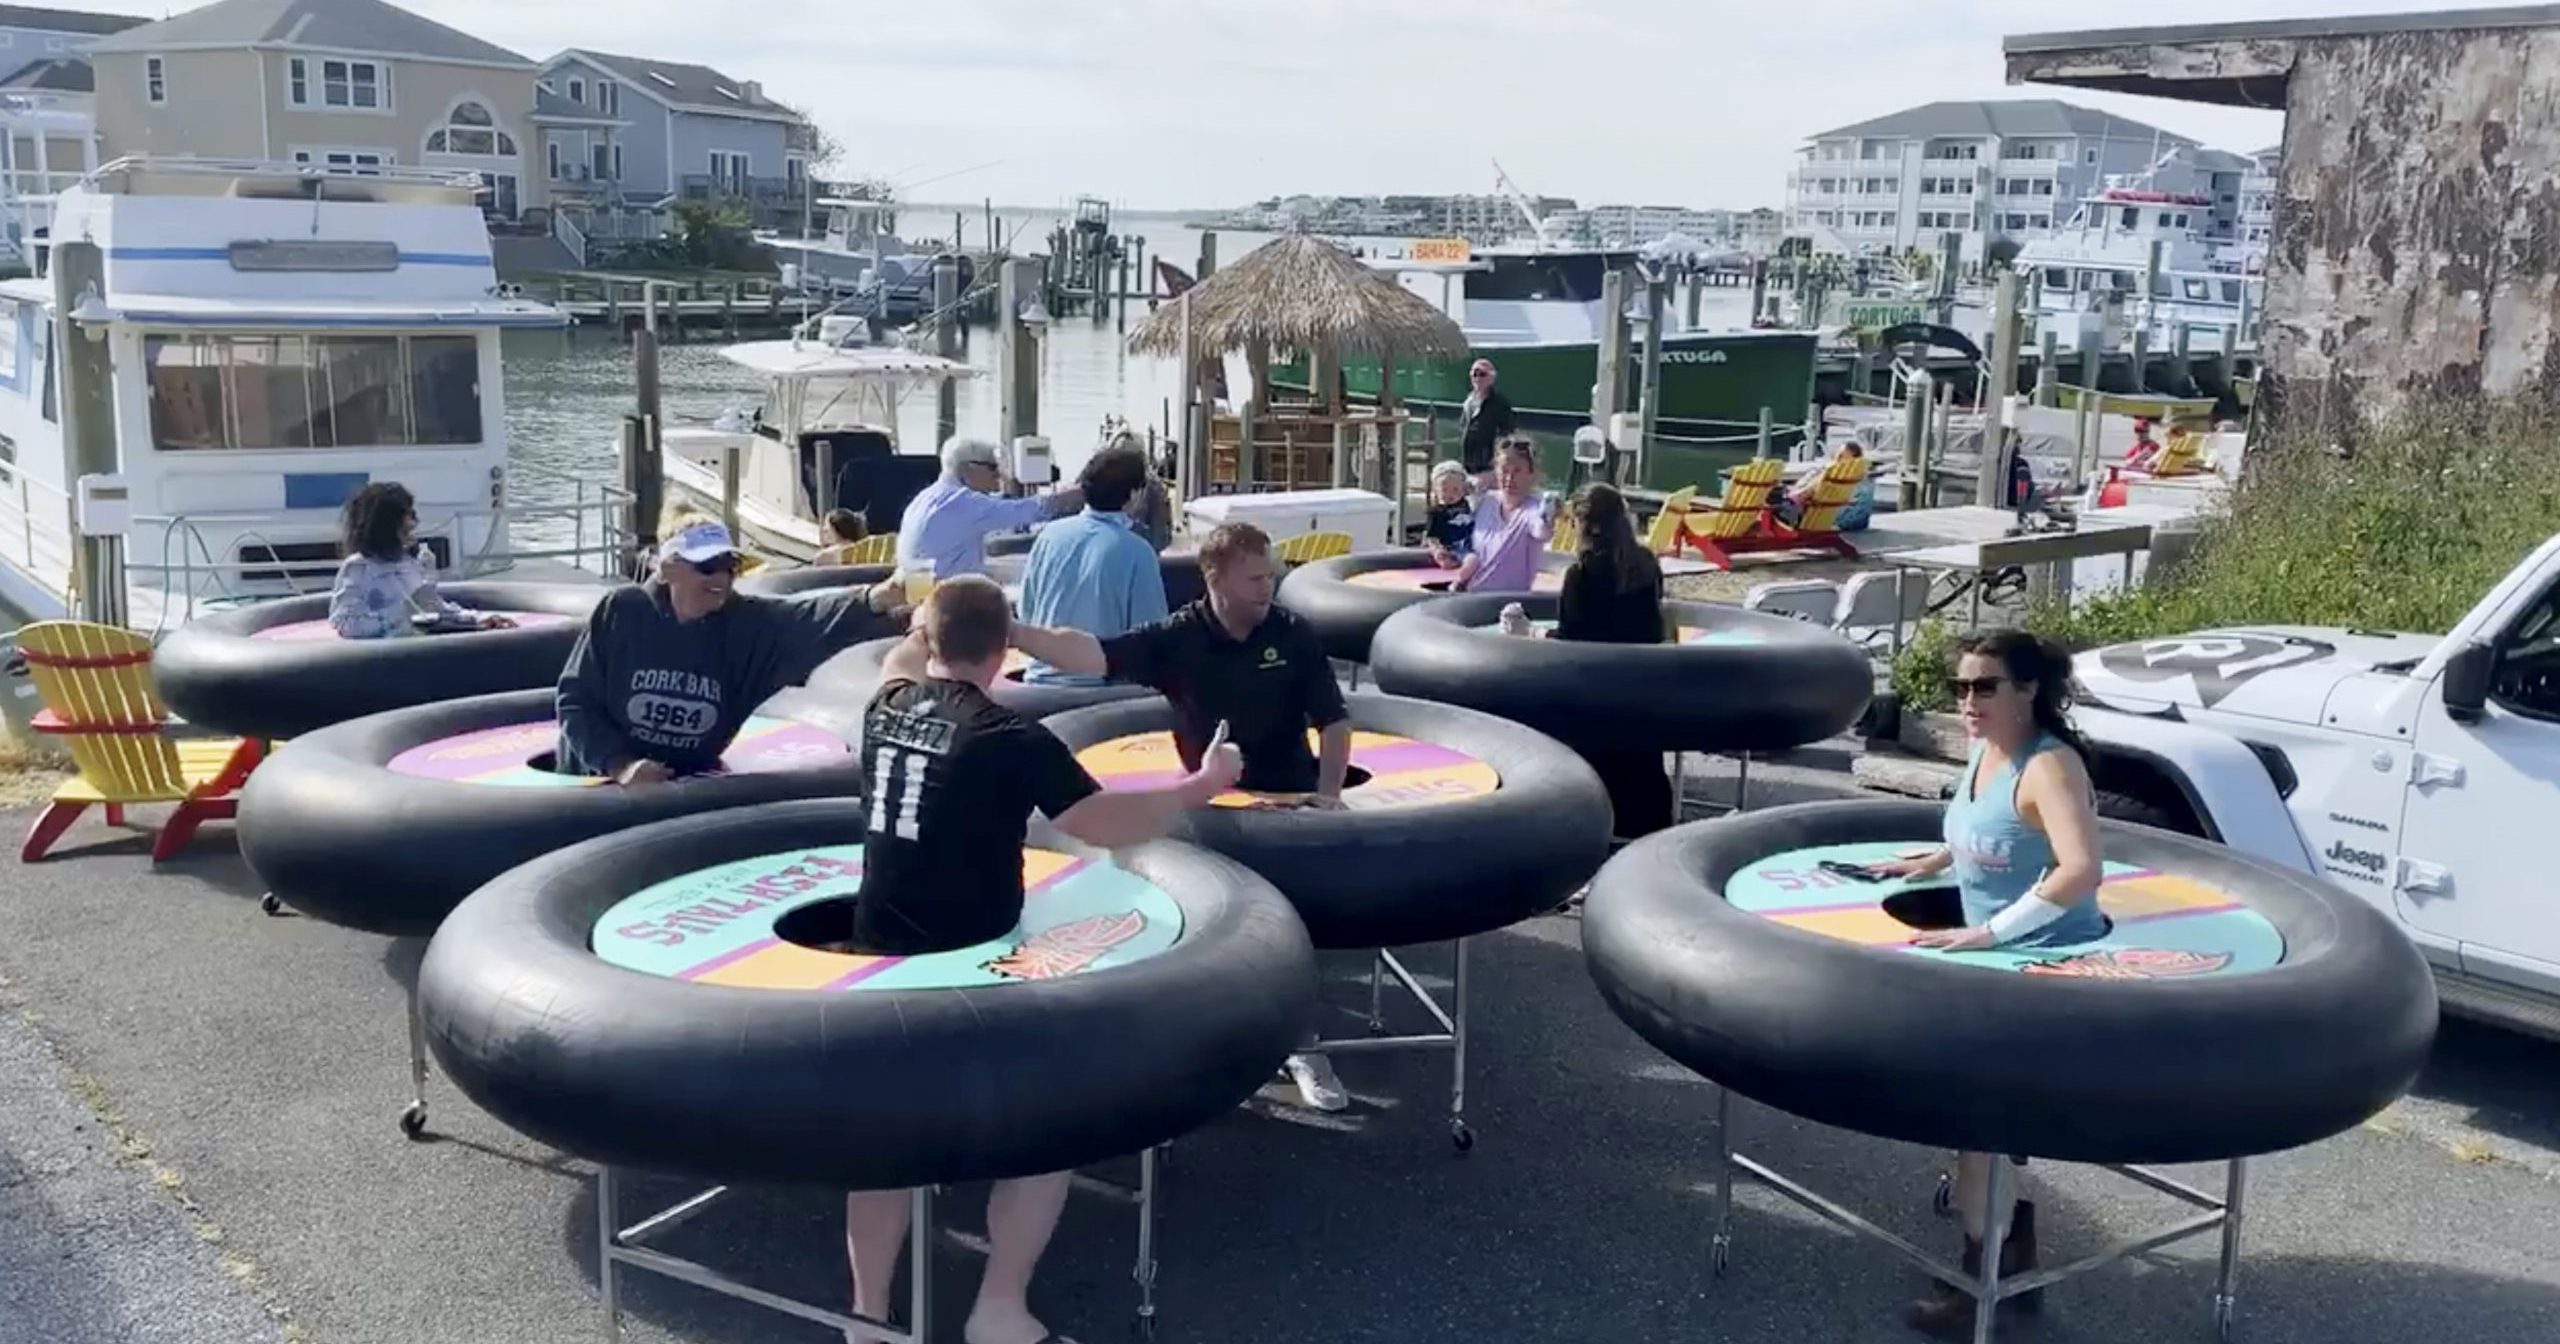 "Bumper tables," designed to allow people to practice social distancing while eating and talking, make their debut at Fish Tales restaurant in Ocean City, Maryland, on May 16, 2020.